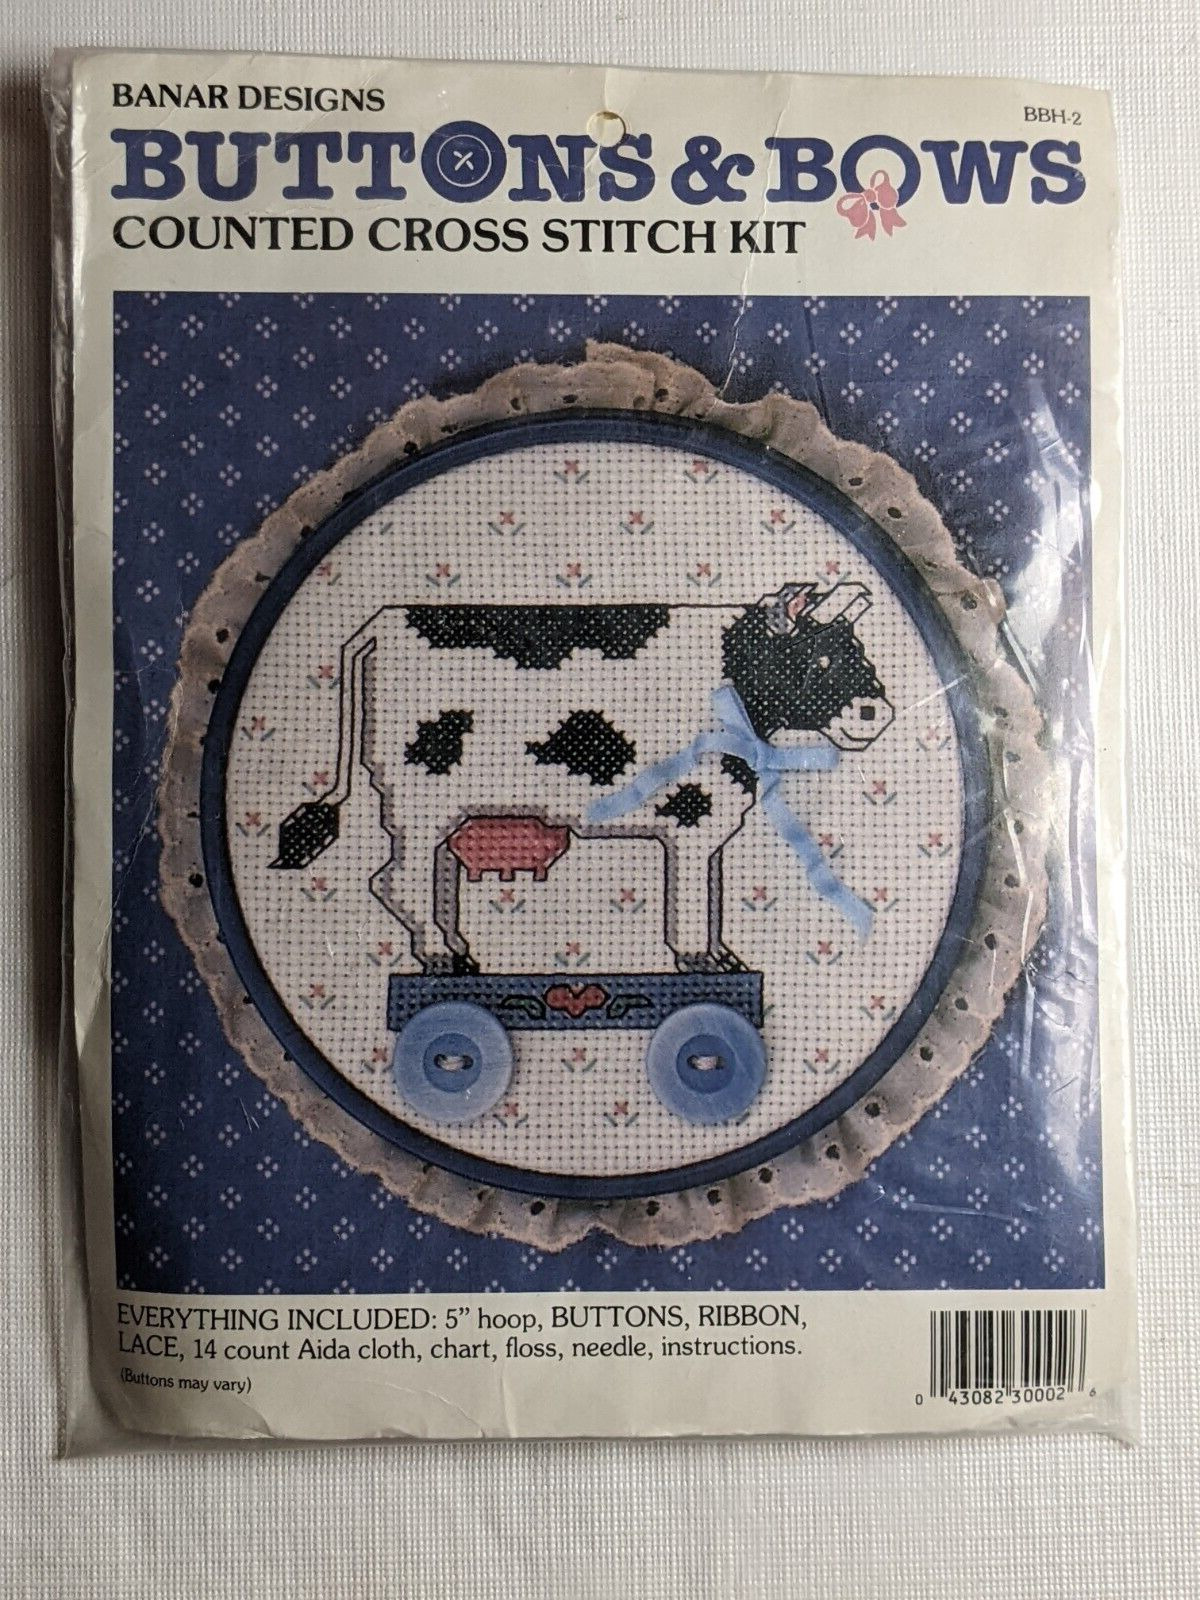 Banar Designs Buttons & Bows Cow Counted Cross Stitch Kit